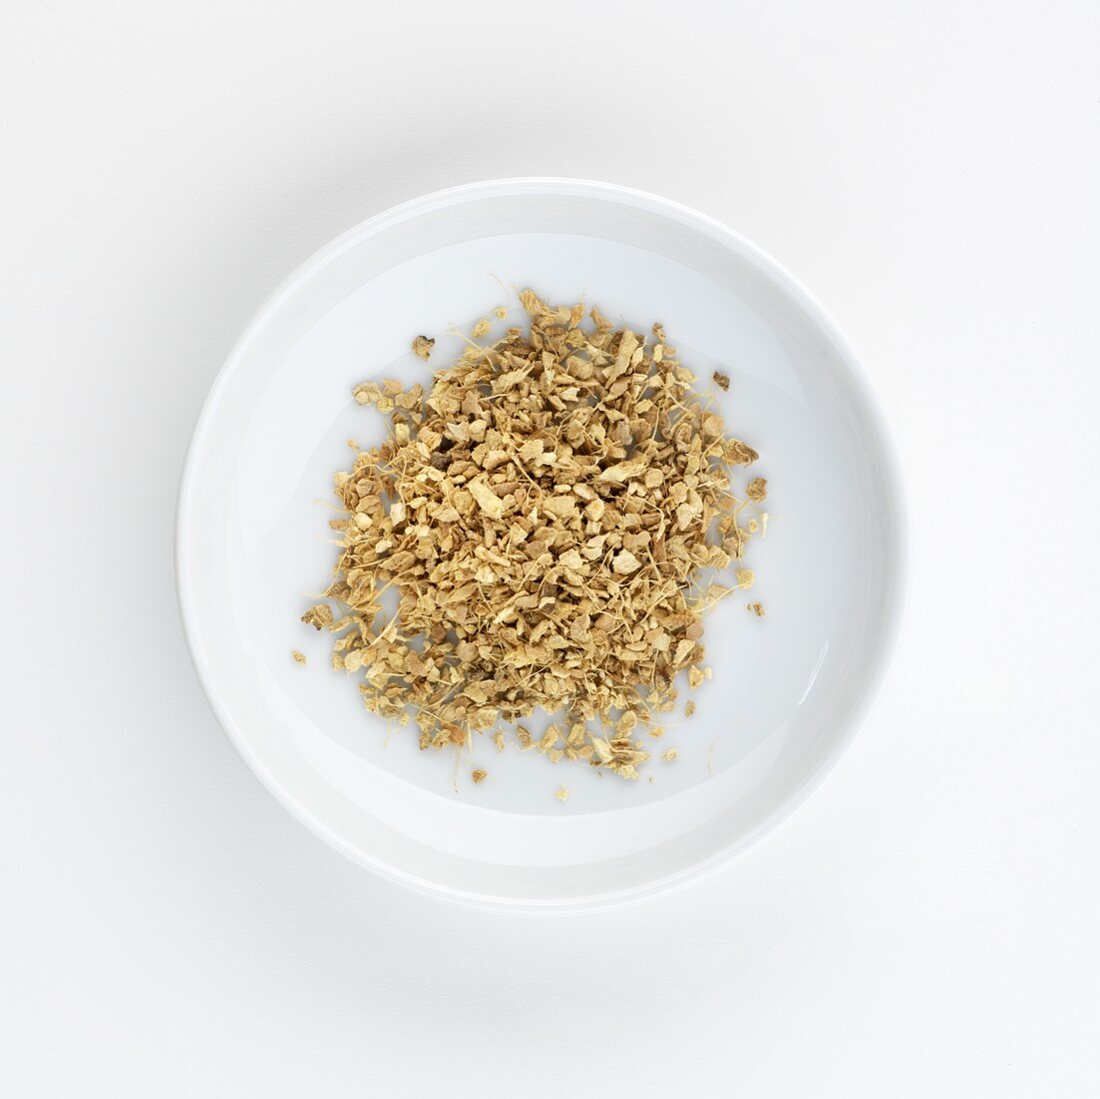 Dried ginger tea on a plate, seen from above